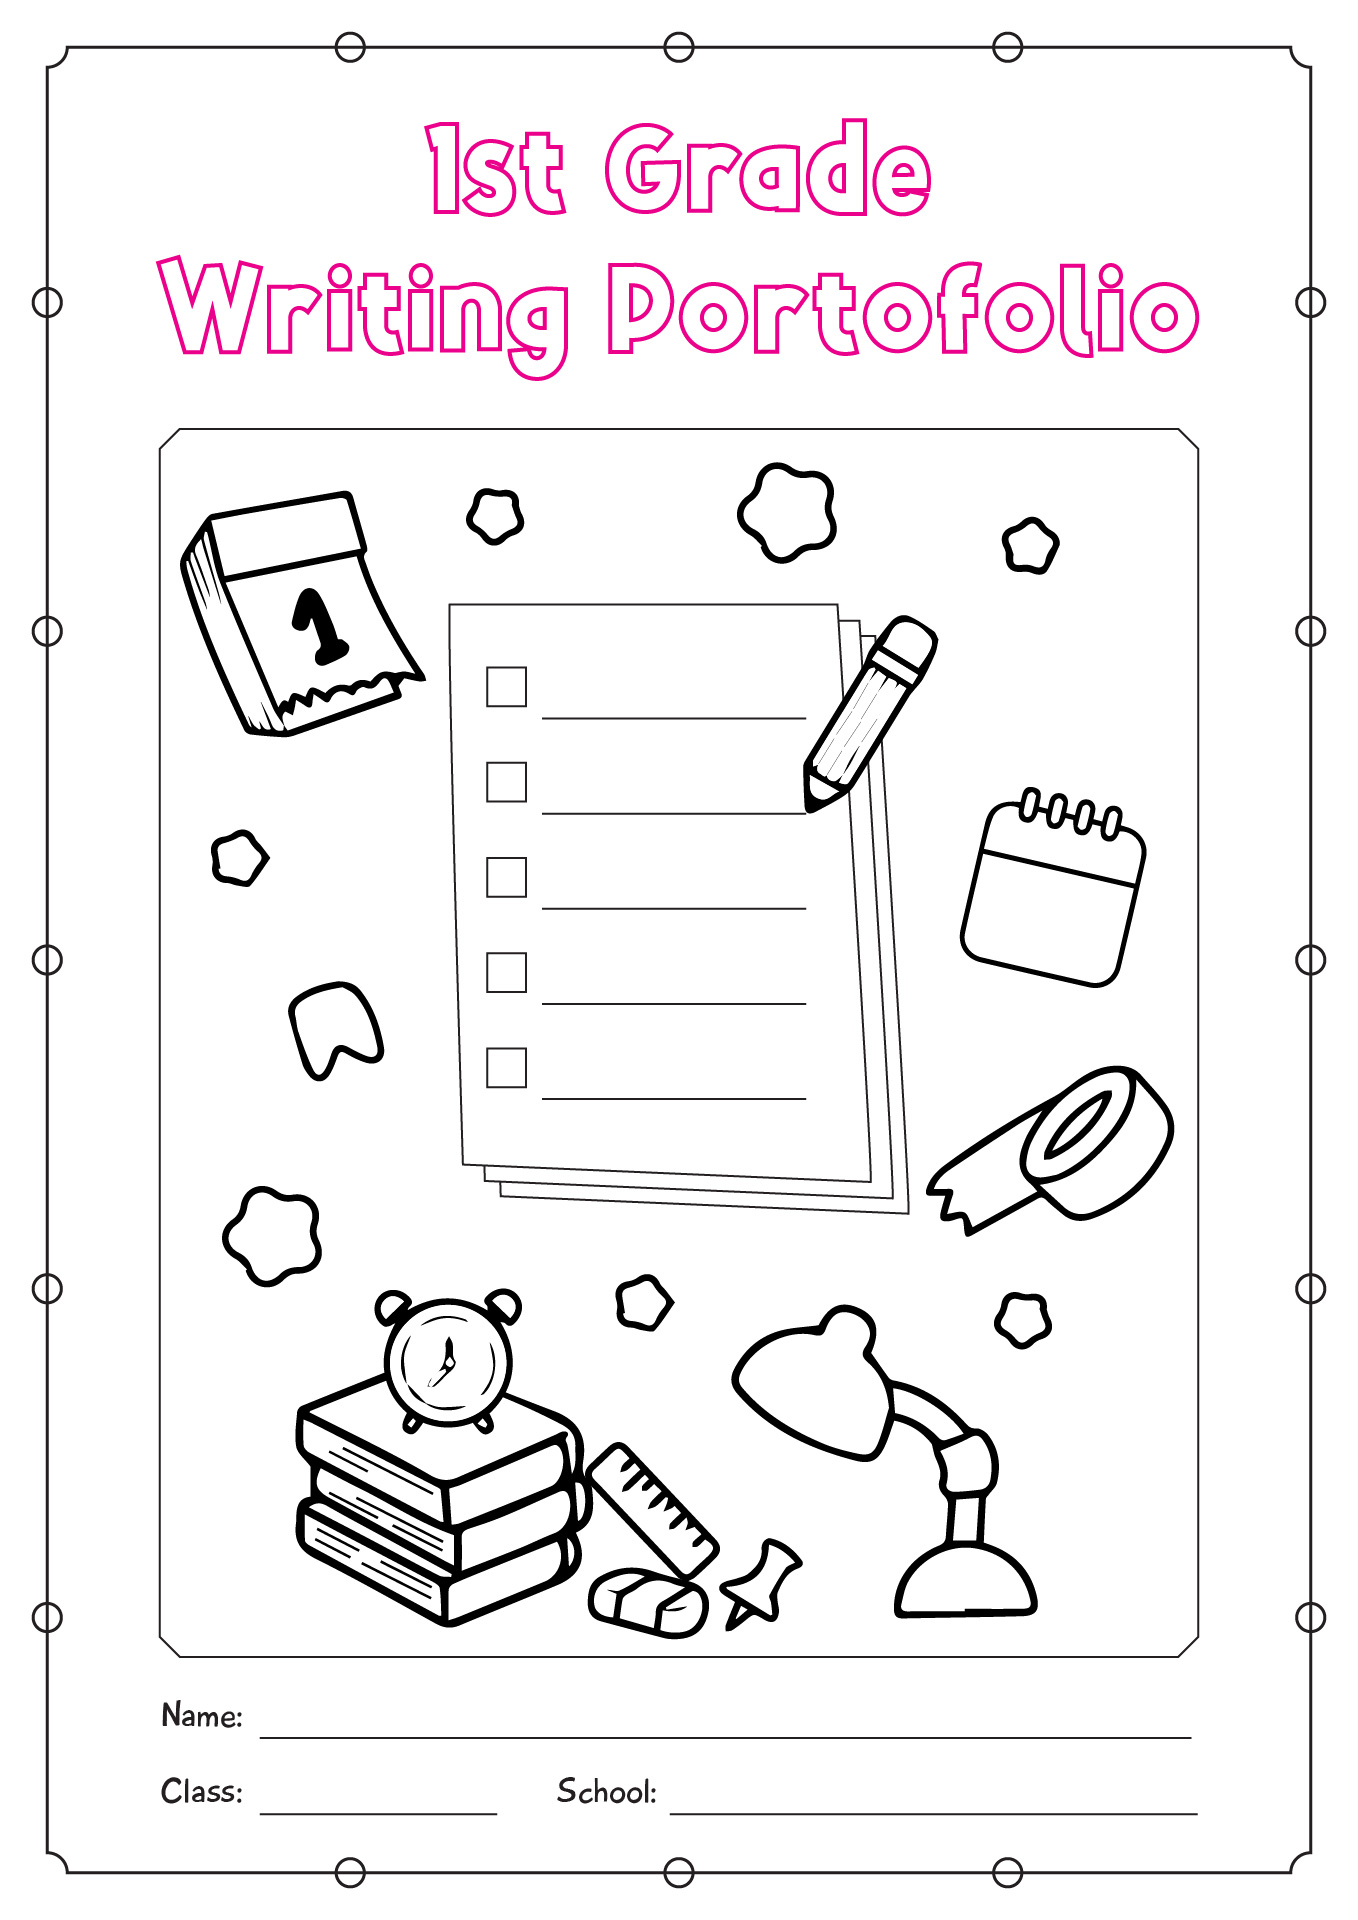 18 Best Images of About.me Worksheet School Cover - Back to School